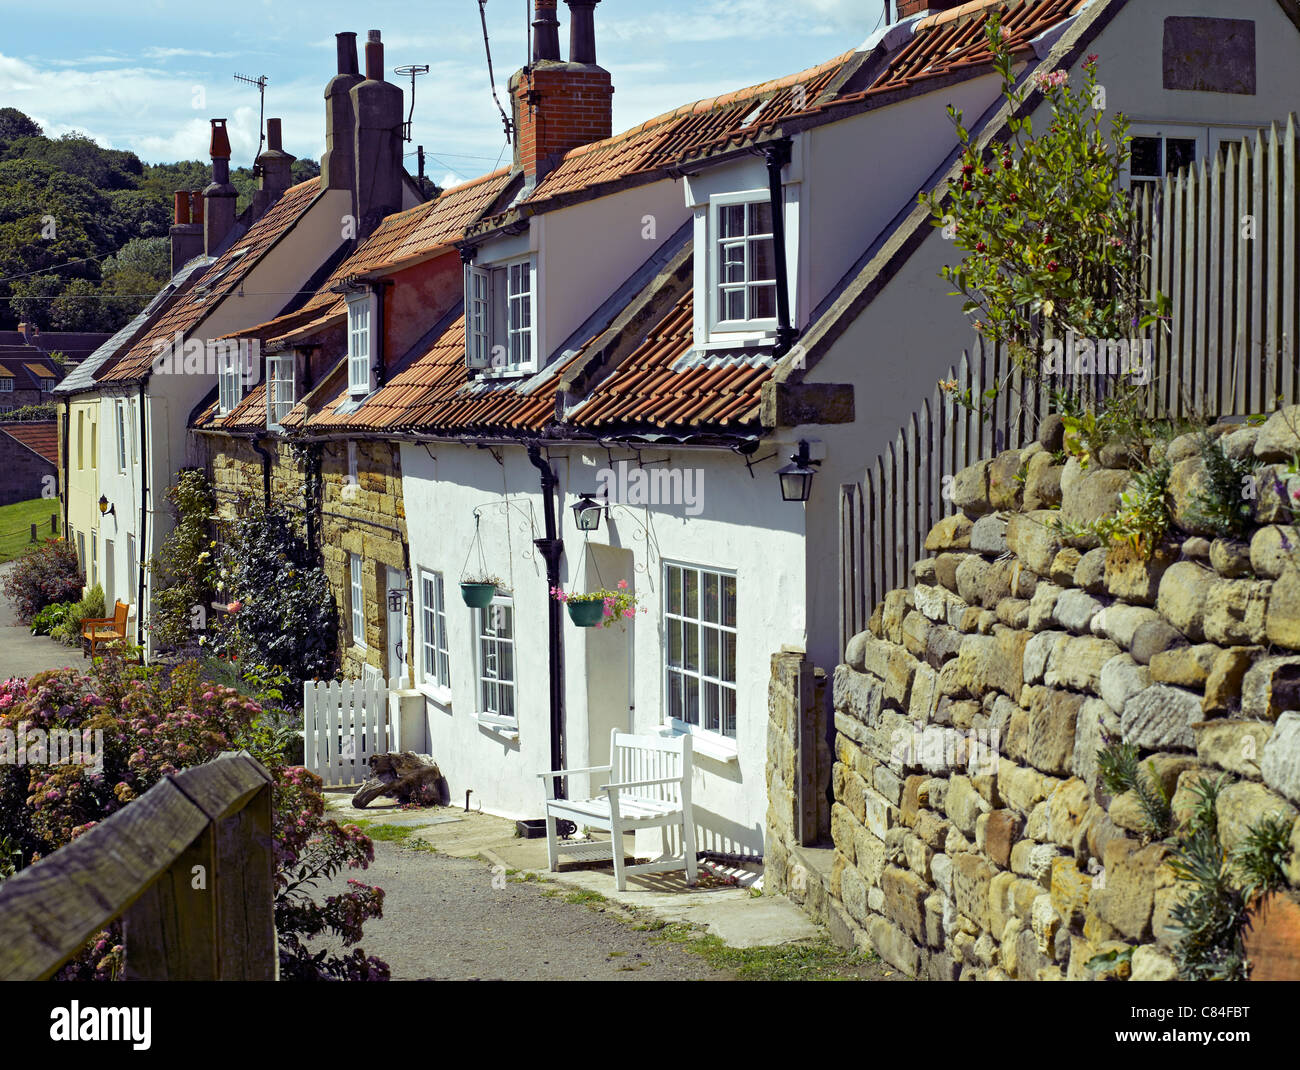 Row Of Cottages At The Seaside Village Of Sandsend Near Whitby